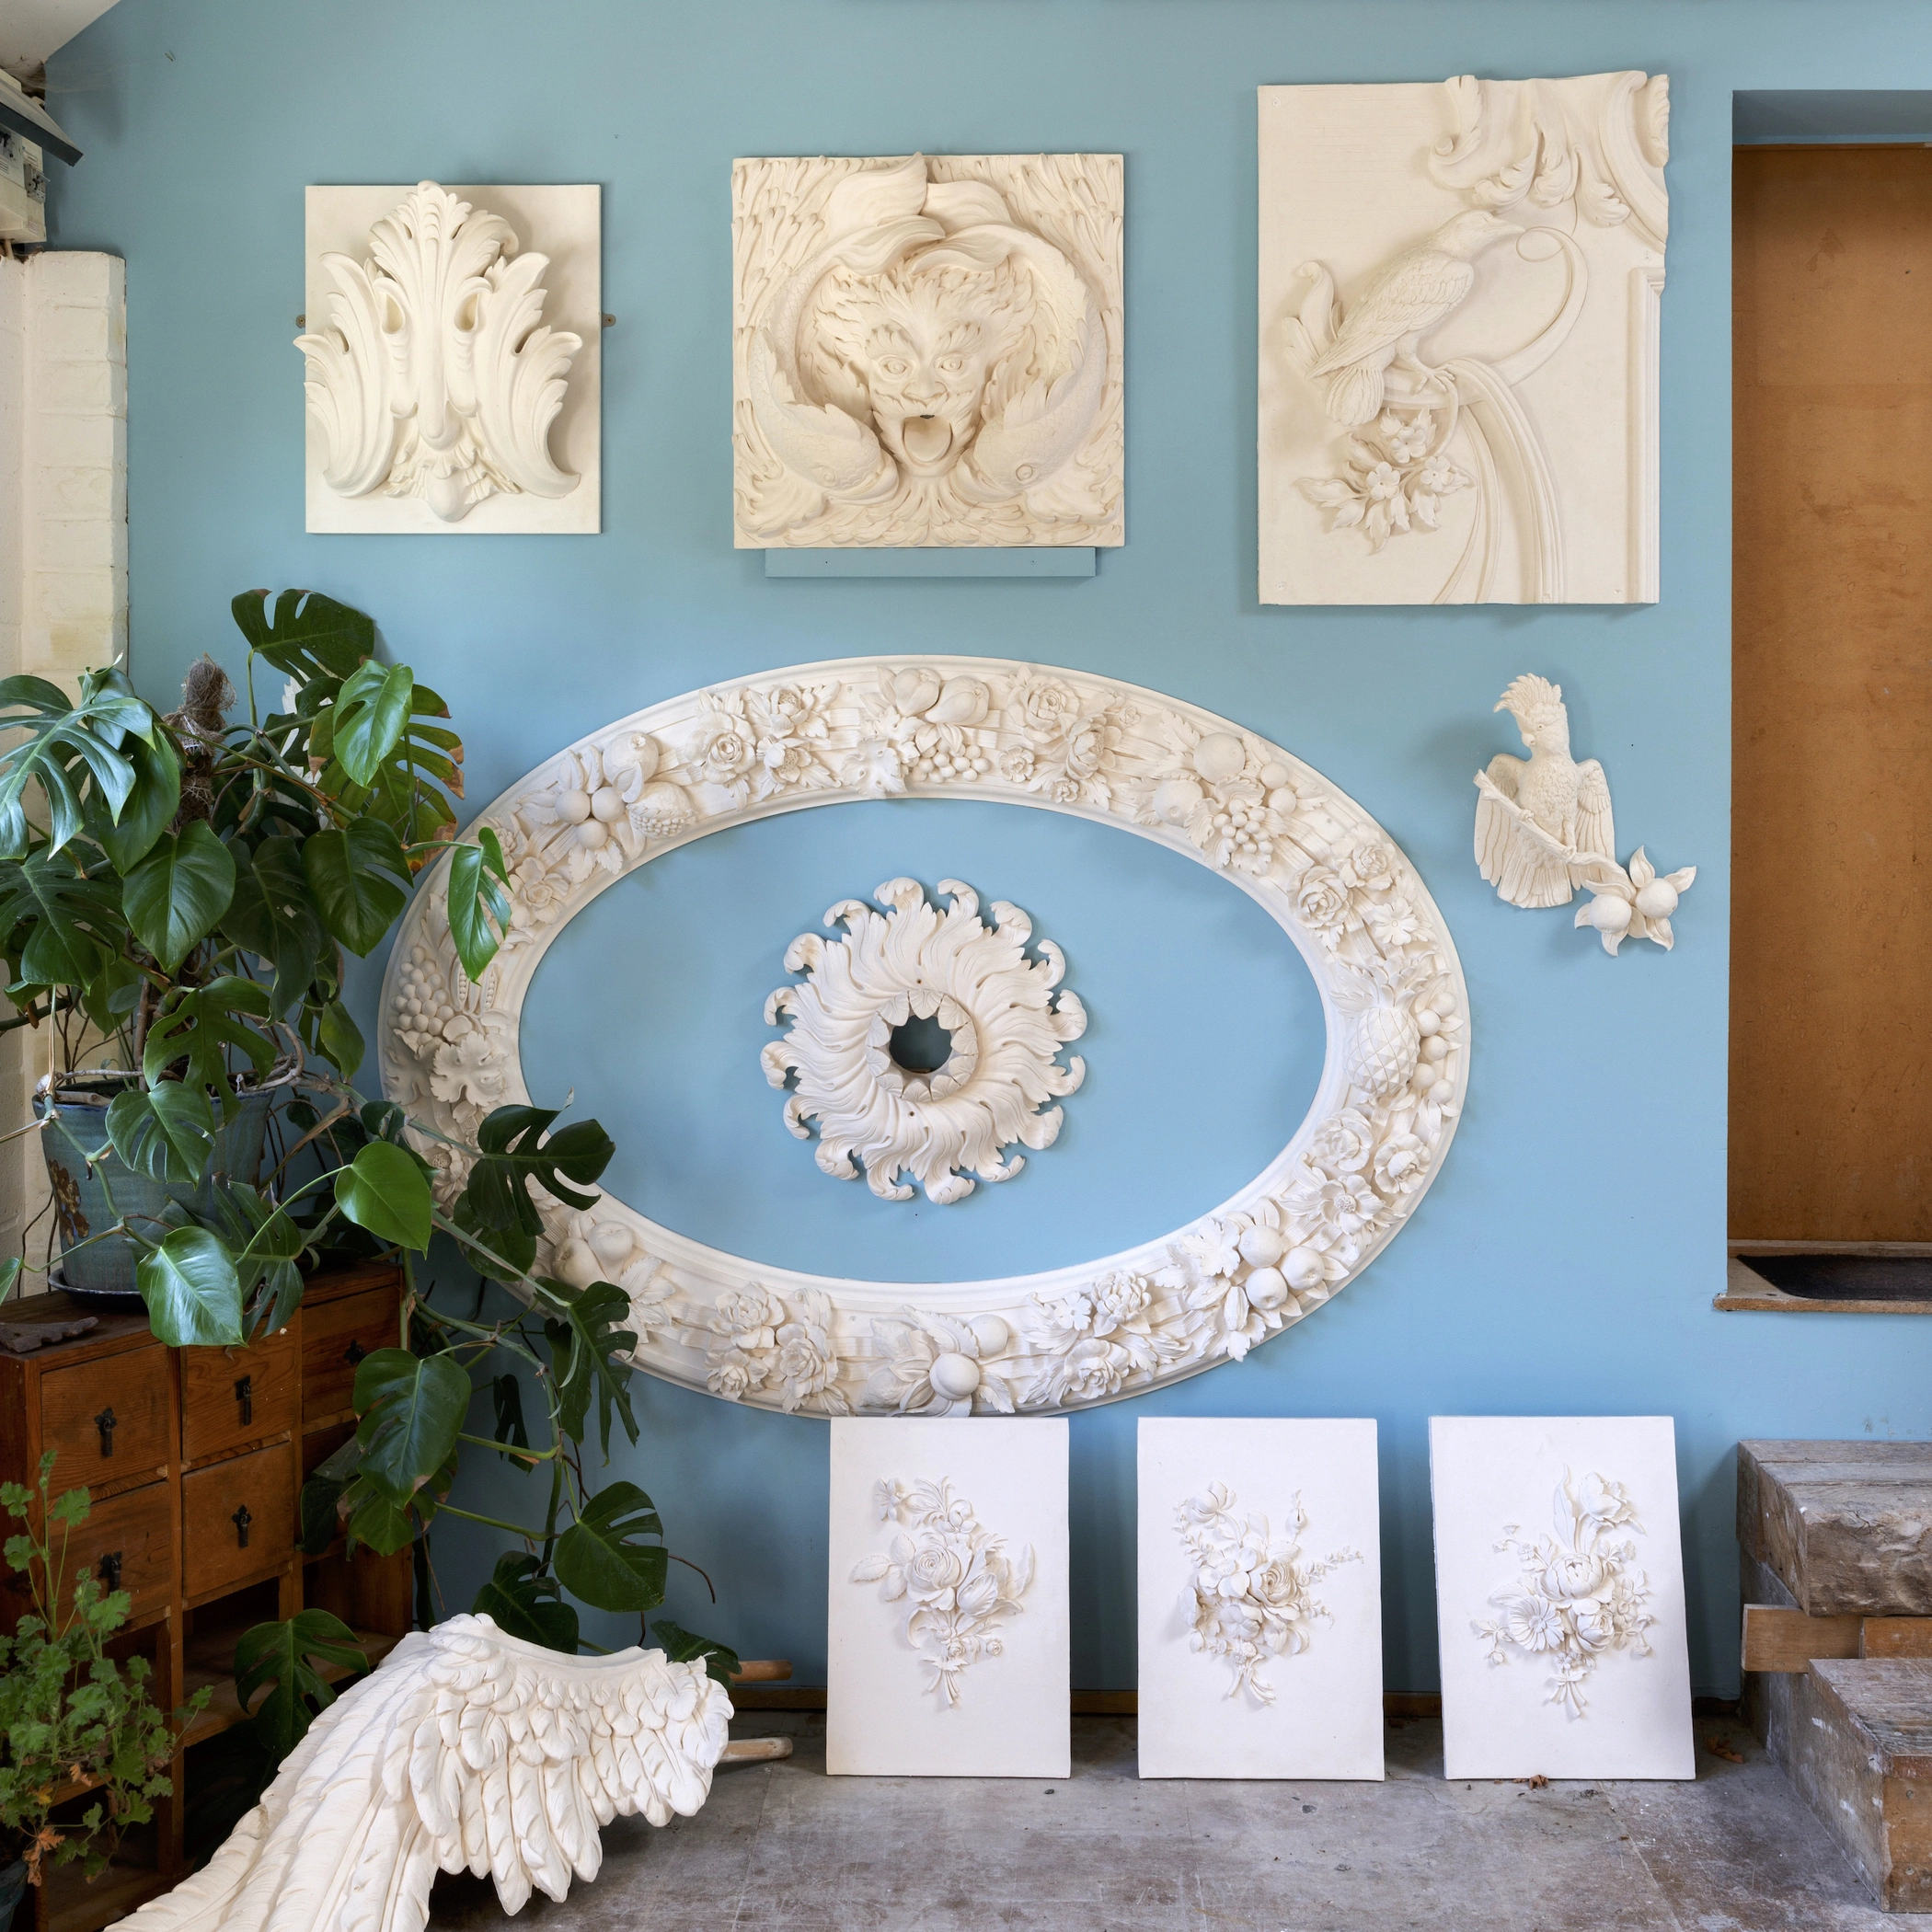 Decorative plaster sculpture displayed on a blue wall with houseplant